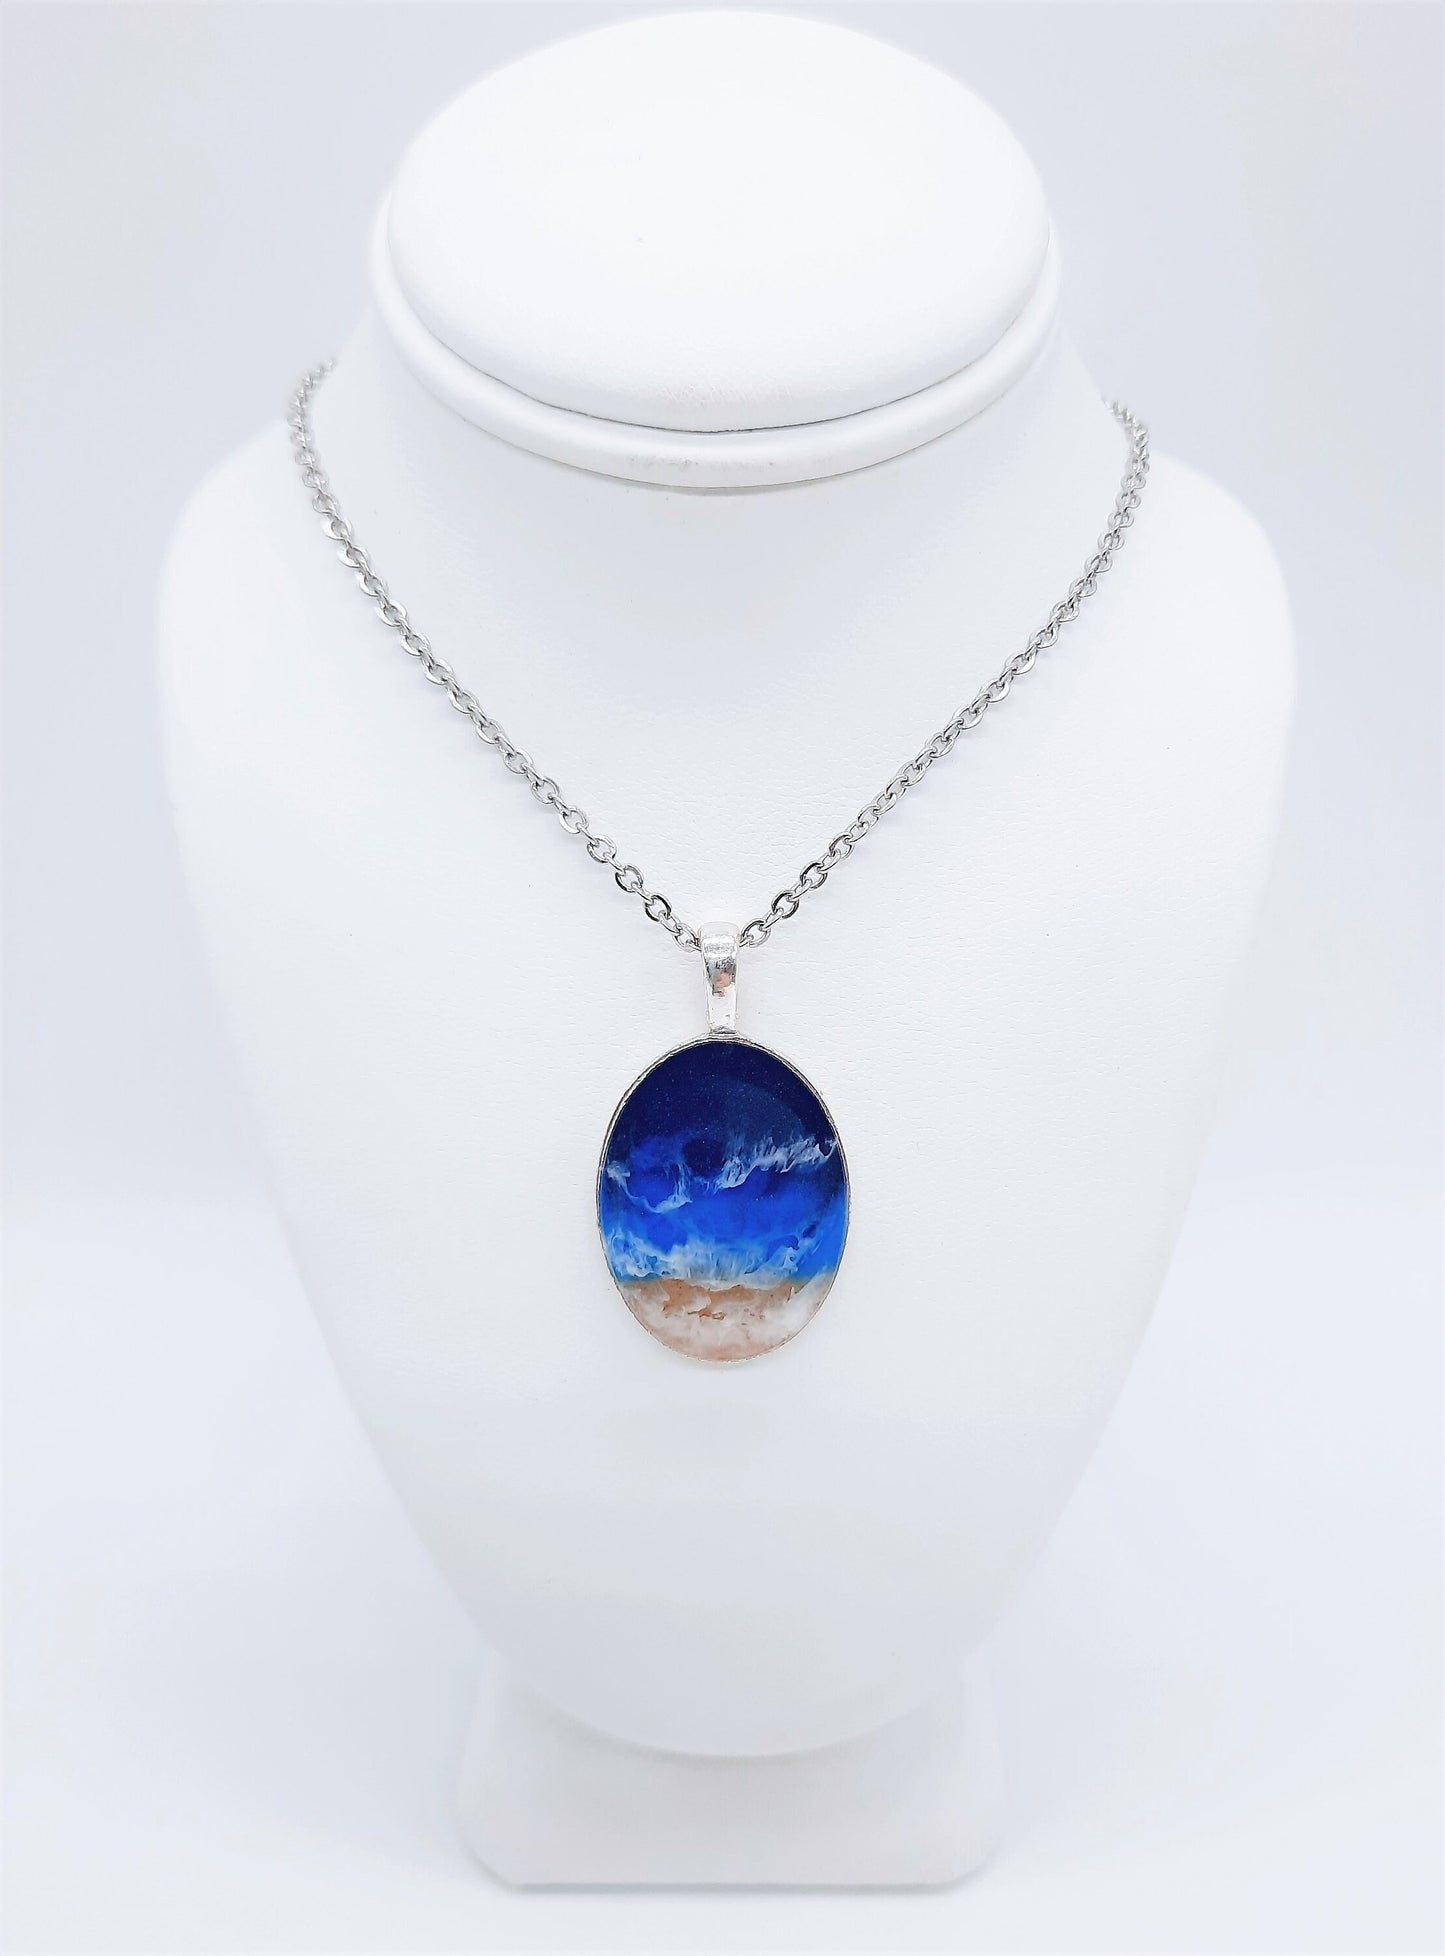 Resin Waves Large Oval Shaped Ocean Pendant / Beach Scene Necklace, Handmade Made with Resin & Real Sand - One of a Kind - Not a Photograph!